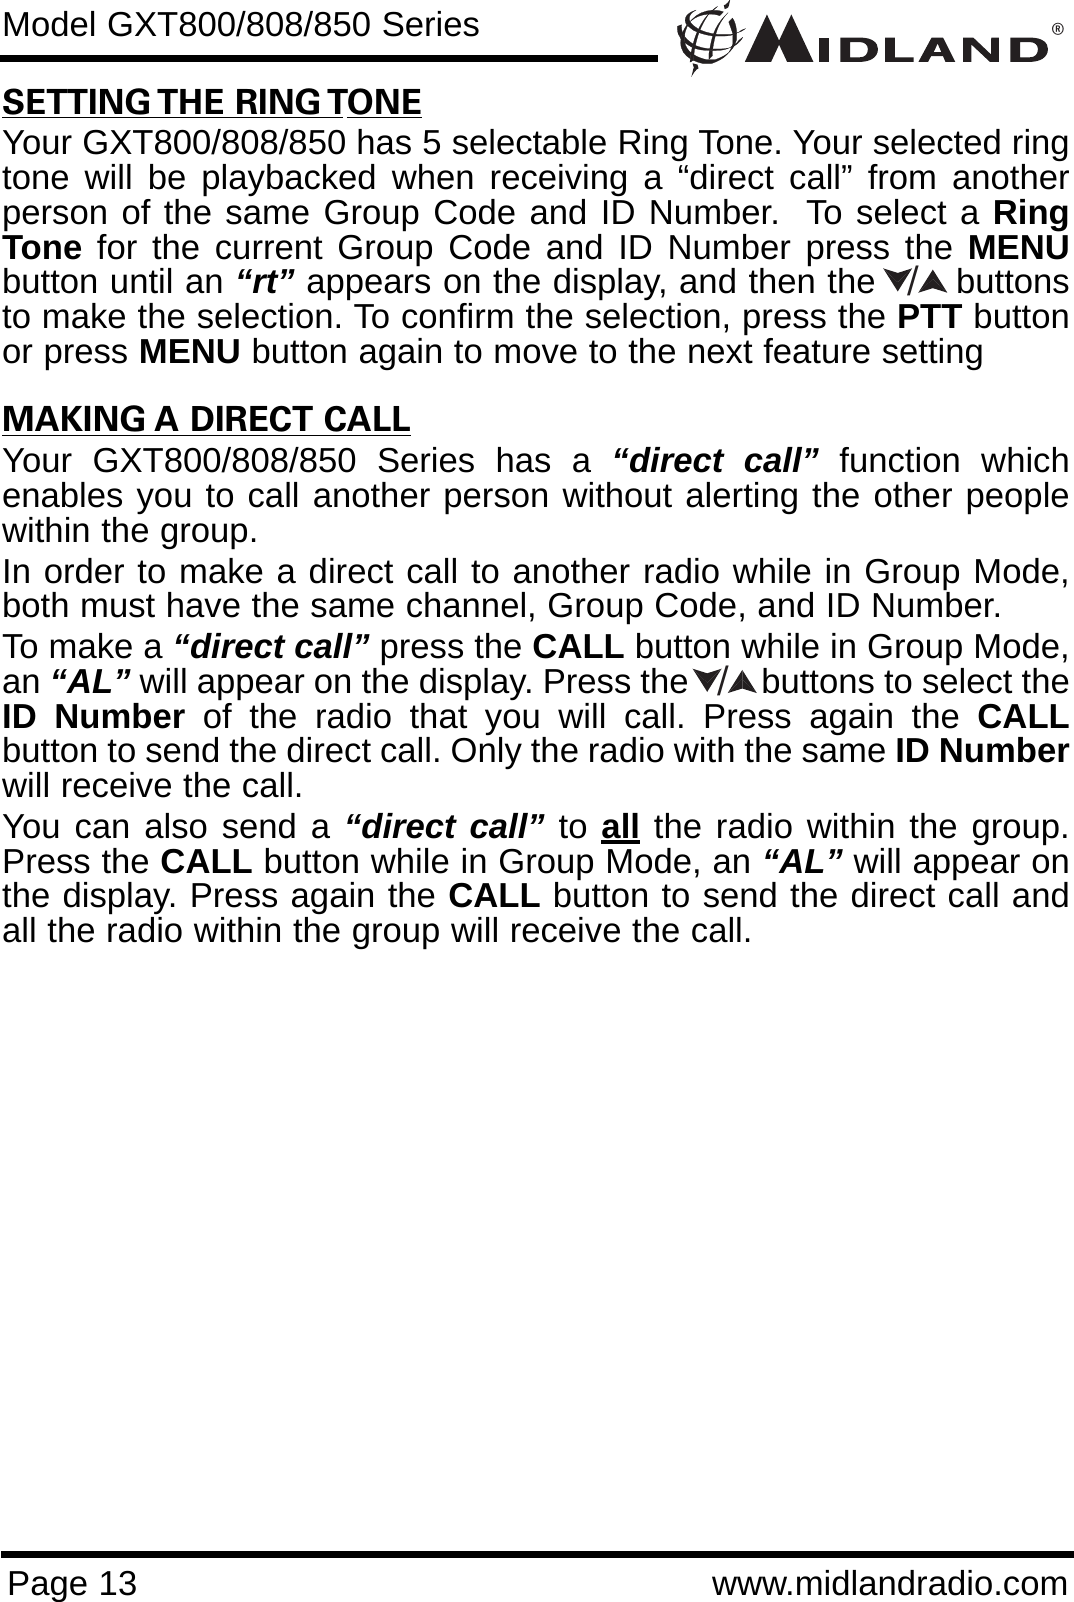 ®Page 13 www.midlandradio.comModel GXT800/808/850 SeriesSETTING THE RING TONEYour GXT800/808/850 has 5 selectable Ring Tone. Your selected ringtone will be playbacked when receiving a “direct call” from anotherperson of the same Group Code and ID Number.  To select a RingTone for the current Group Code and ID Number press the MENUbutton until an “rt” appears on the display, and then the       buttonsto make the selection. To confirm the selection, press the PTT buttonor press MENU button again to move to the next feature settingMAKING A DIRECT CALLYour GXT800/808/850 Series has a “direct call” function whichenables you to call another person without alerting the other peoplewithin the group.In order to make a direct call to another radio while in Group Mode,both must have the same channel, Group Code, and ID Number.To make a “direct call” press the CALL button while in Group Mode,an “AL” will appear on the display. Press the        buttons to select theID Number of the radio that you will call. Press again the CALLbutton to send the direct call. Only the radio with the same ID Numberwill receive the call.You can also send a “direct call” to all the radio within the group.Press the CALL button while in Group Mode, an “AL” will appear onthe display. Press again the CALL button to send the direct call andall the radio within the group will receive the call.//